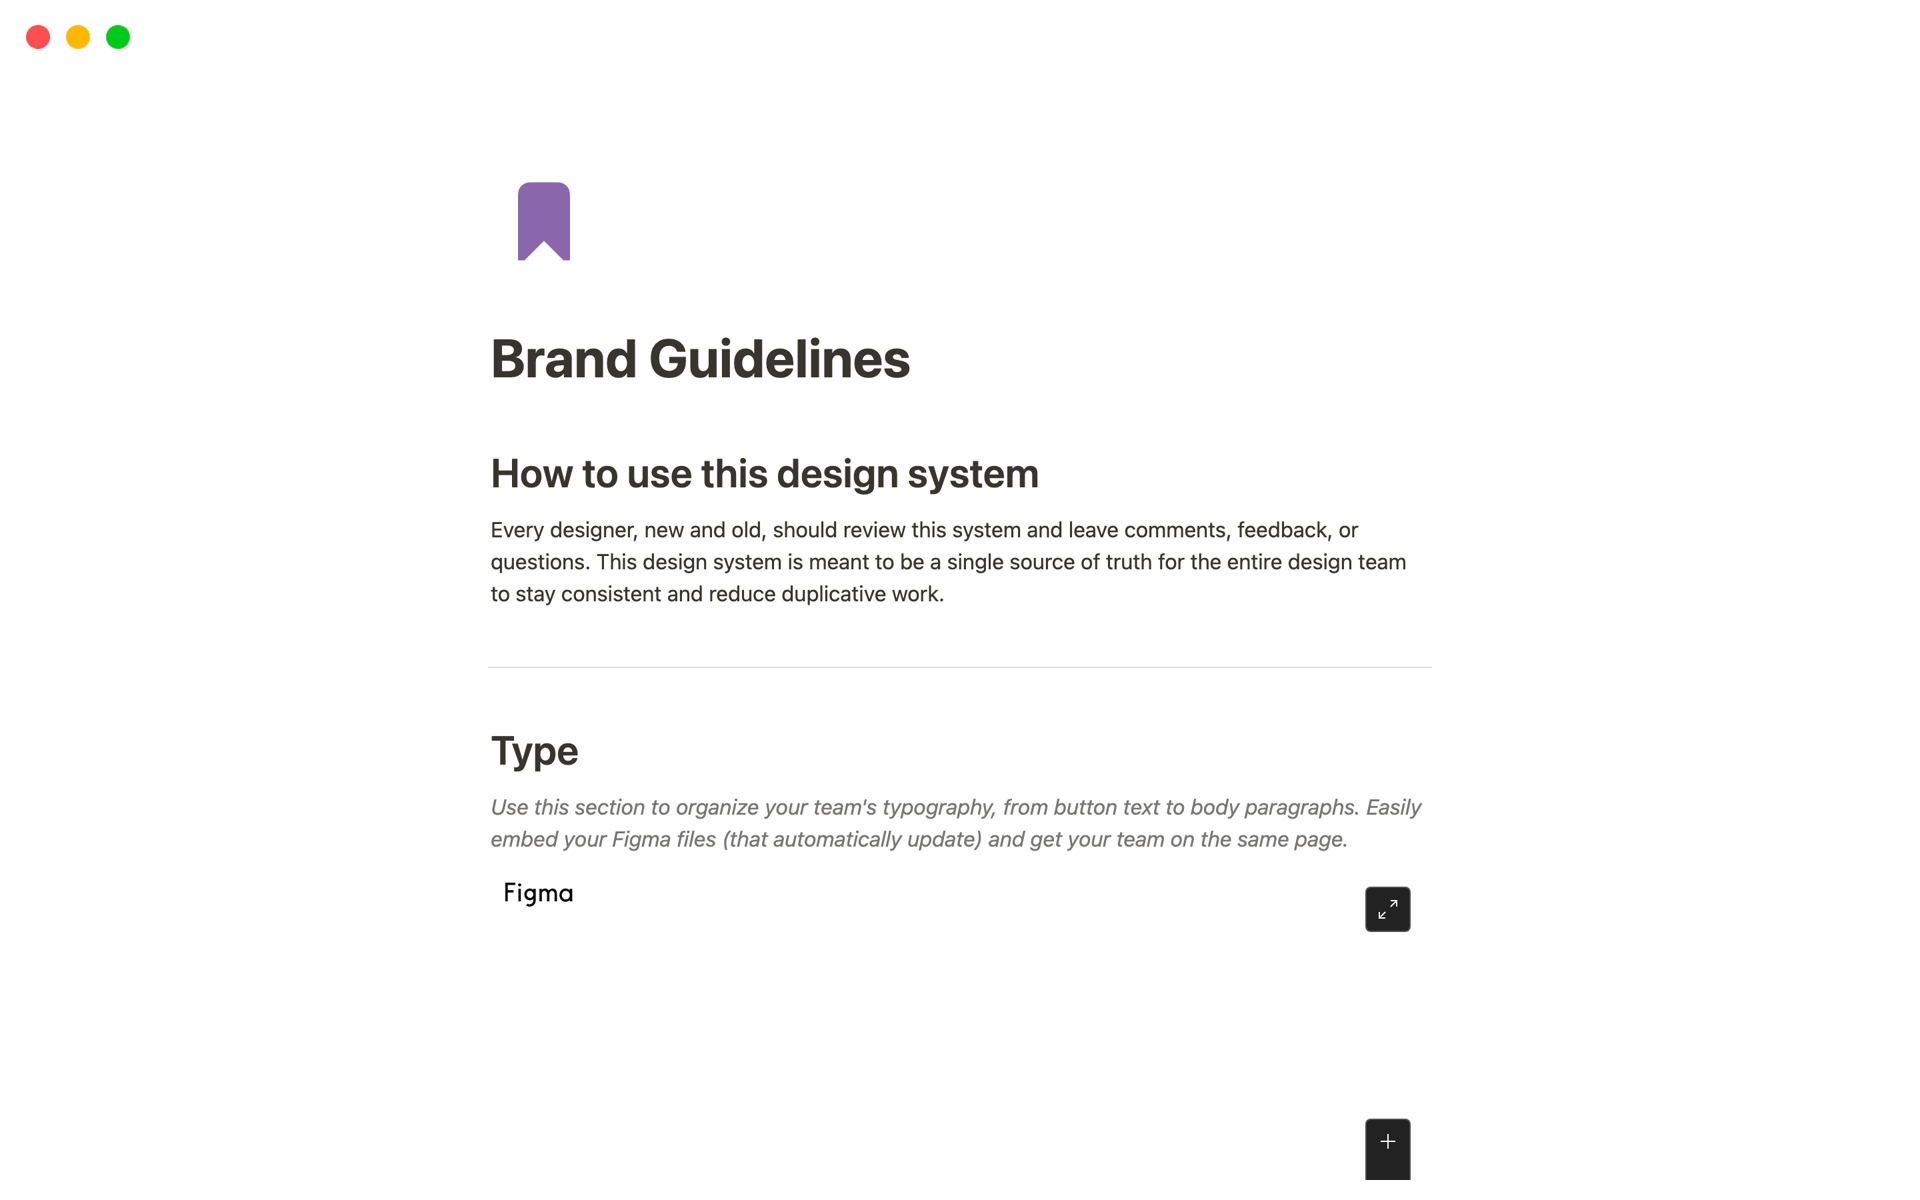 Ensure design consistency across your team with our comprehensive Brand Guidelines template.